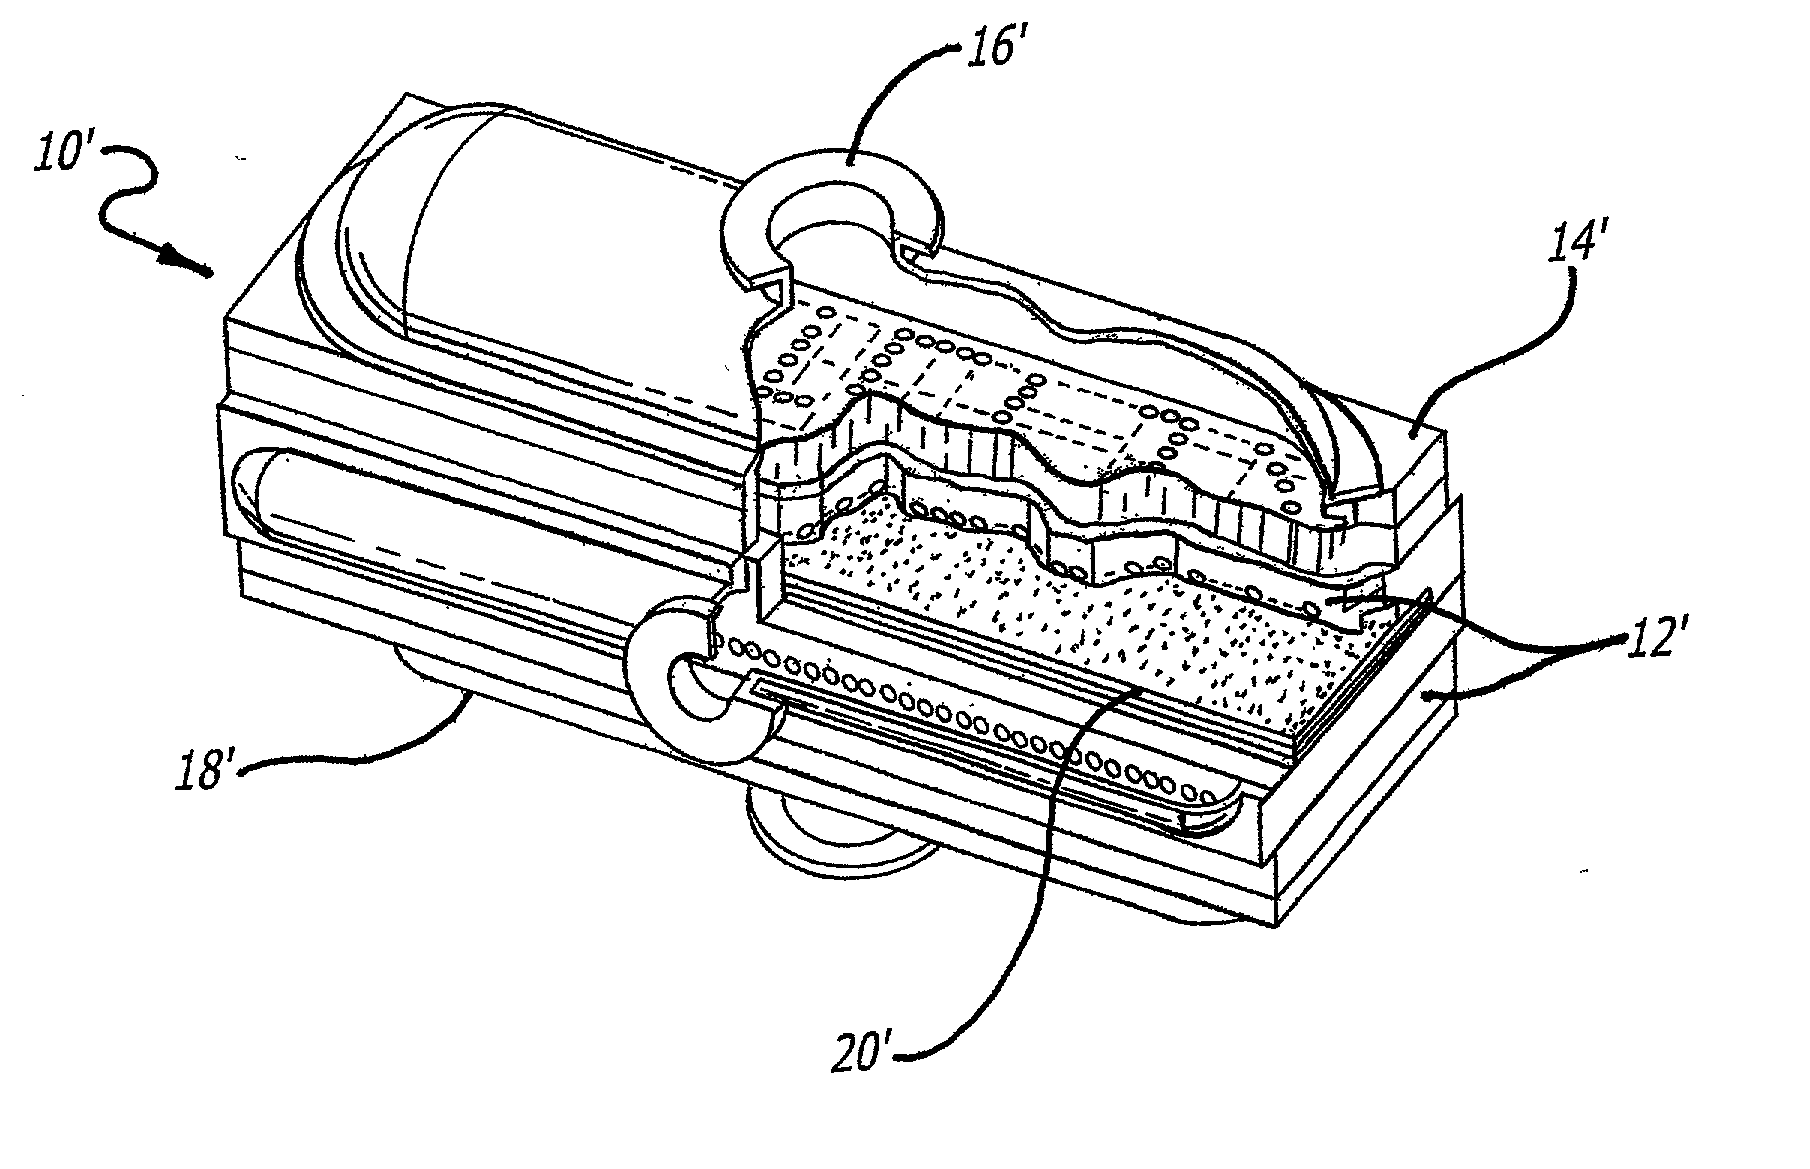 Laser cooling apparatus and method